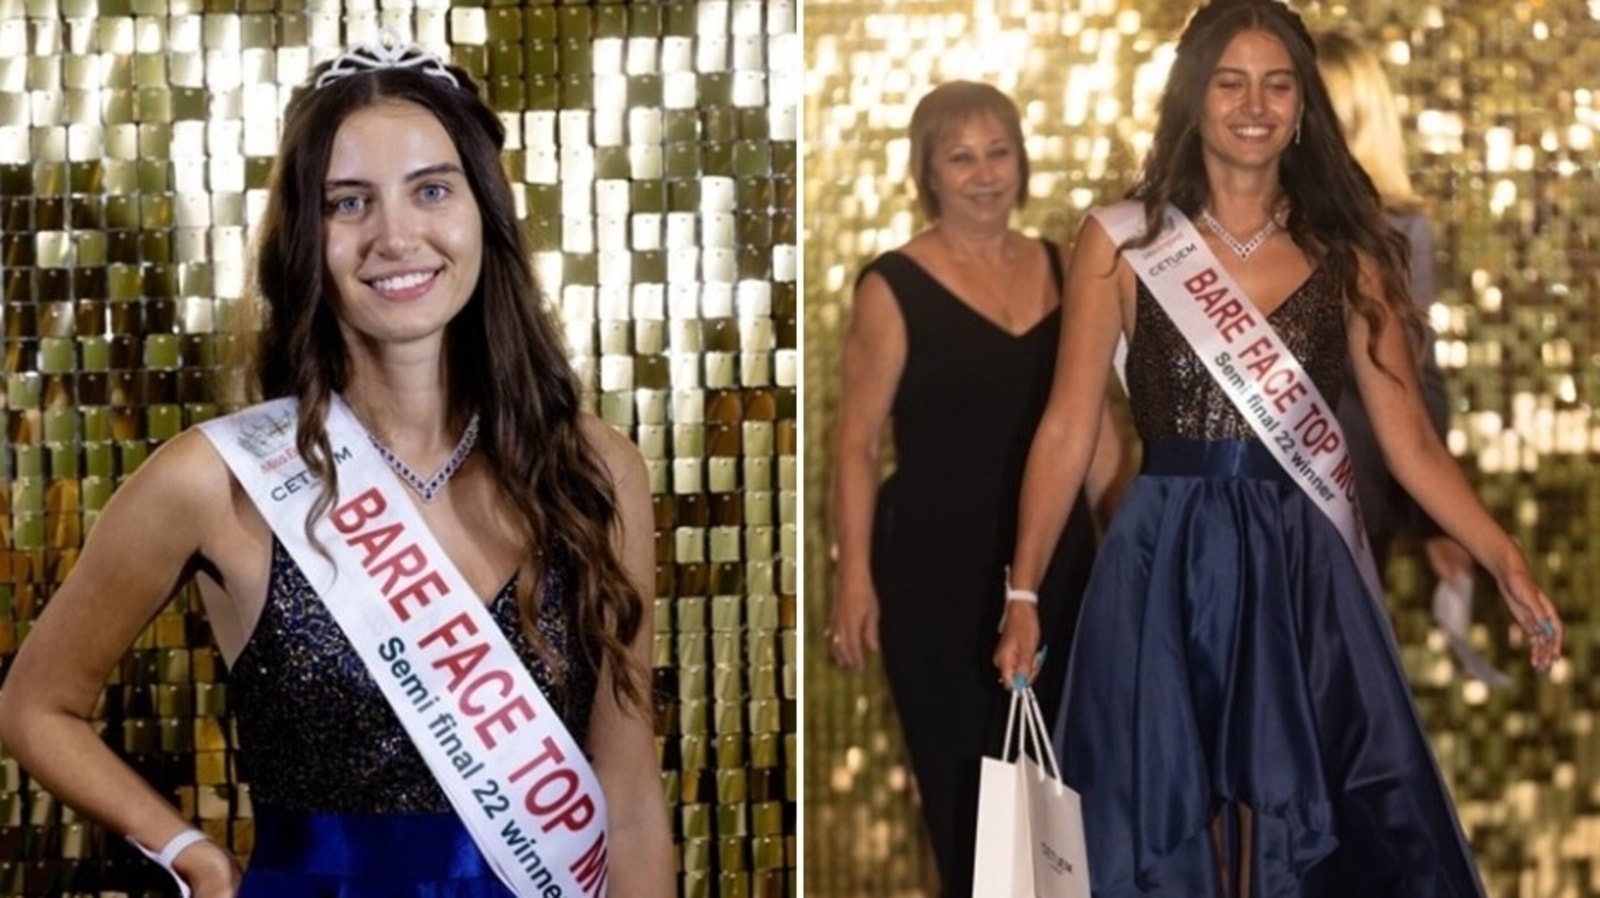 20-year-old Miss England finalist becomes first contestant to go makeup free in pageant’s history